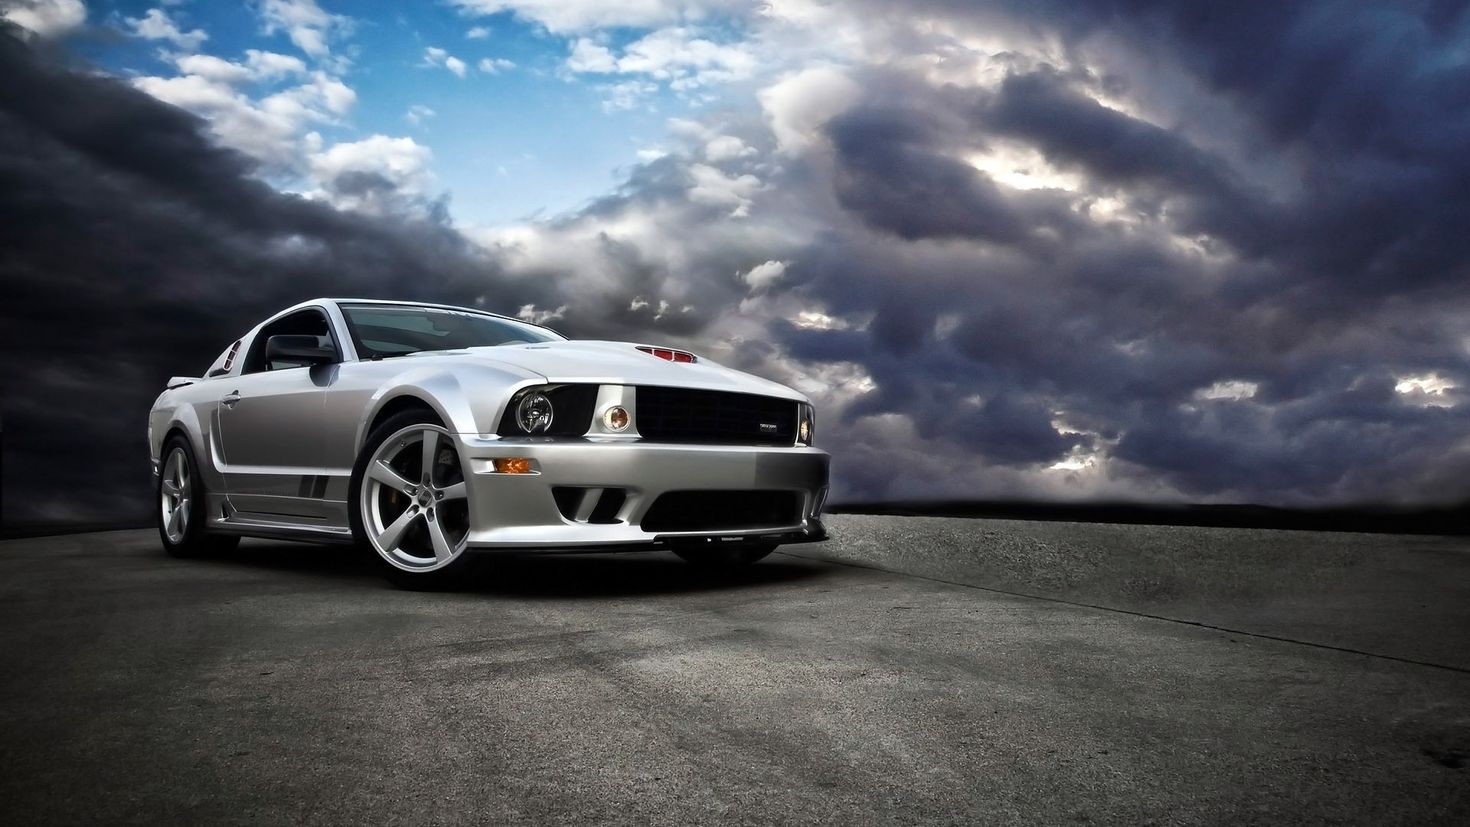 Ford Mustang Saleen 2008